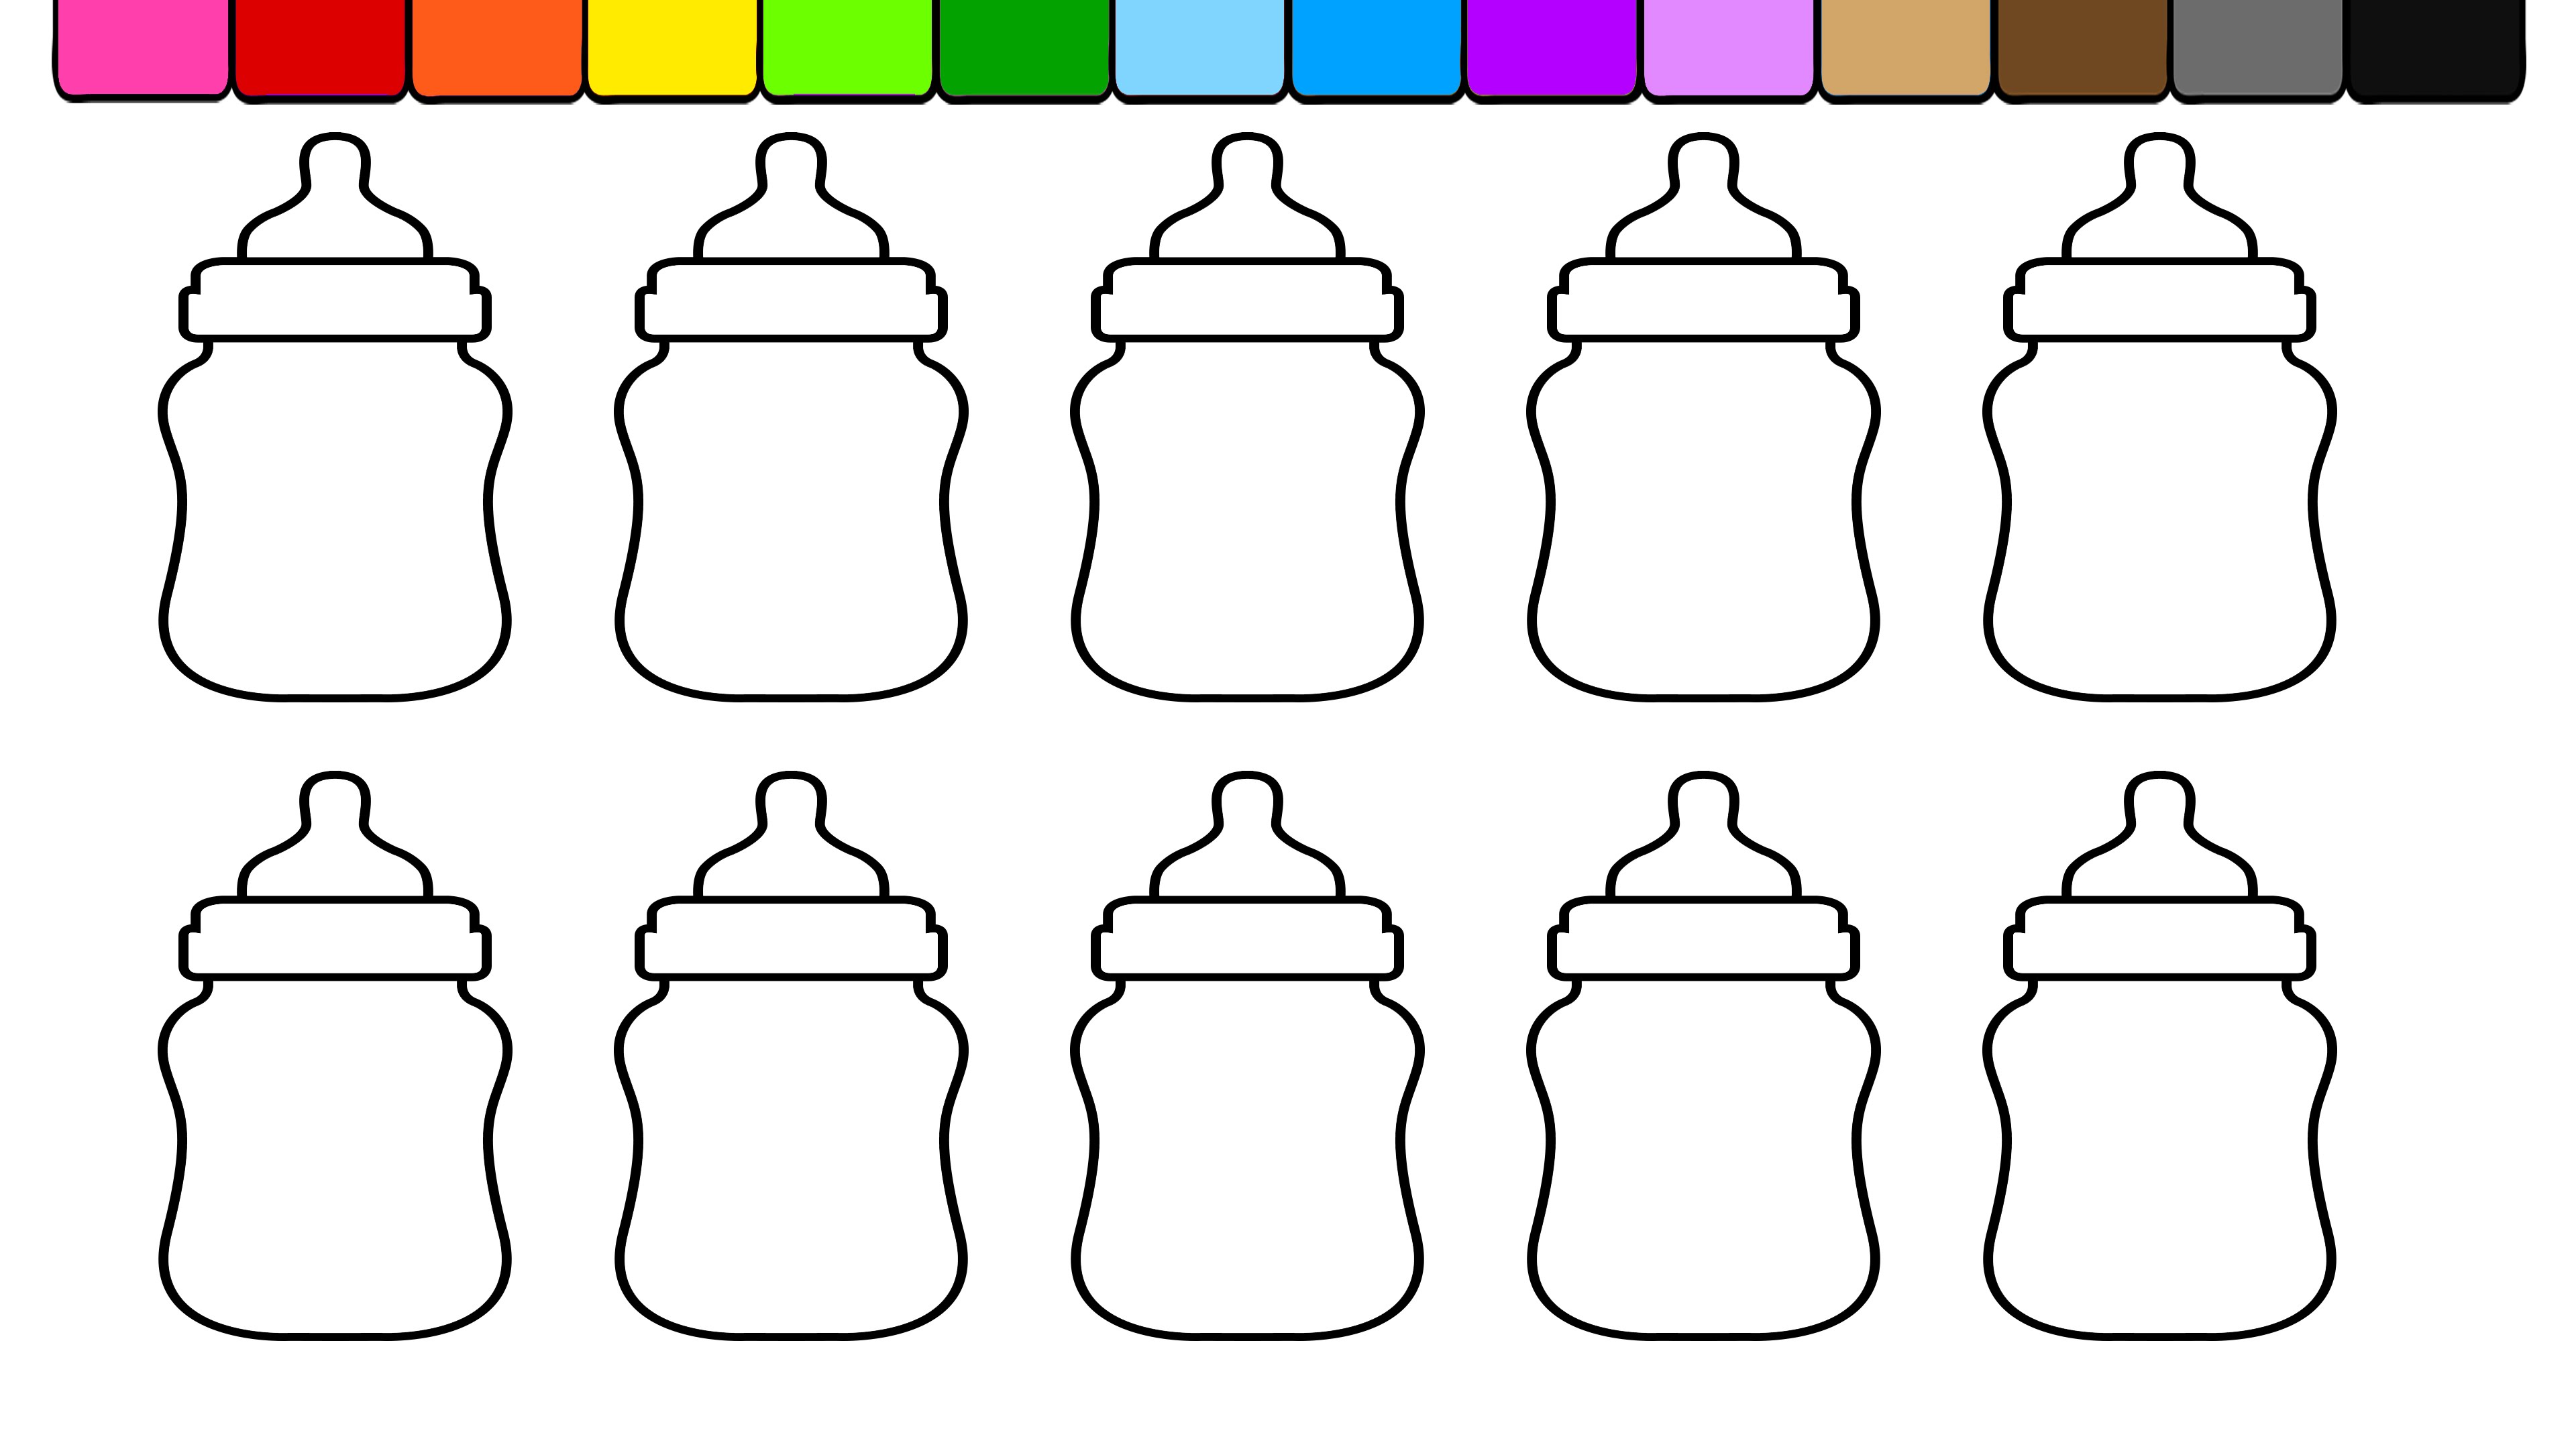 10. Nail Polish Bottle Coloring Page - Coloring Pages for Preschoolers - wide 2